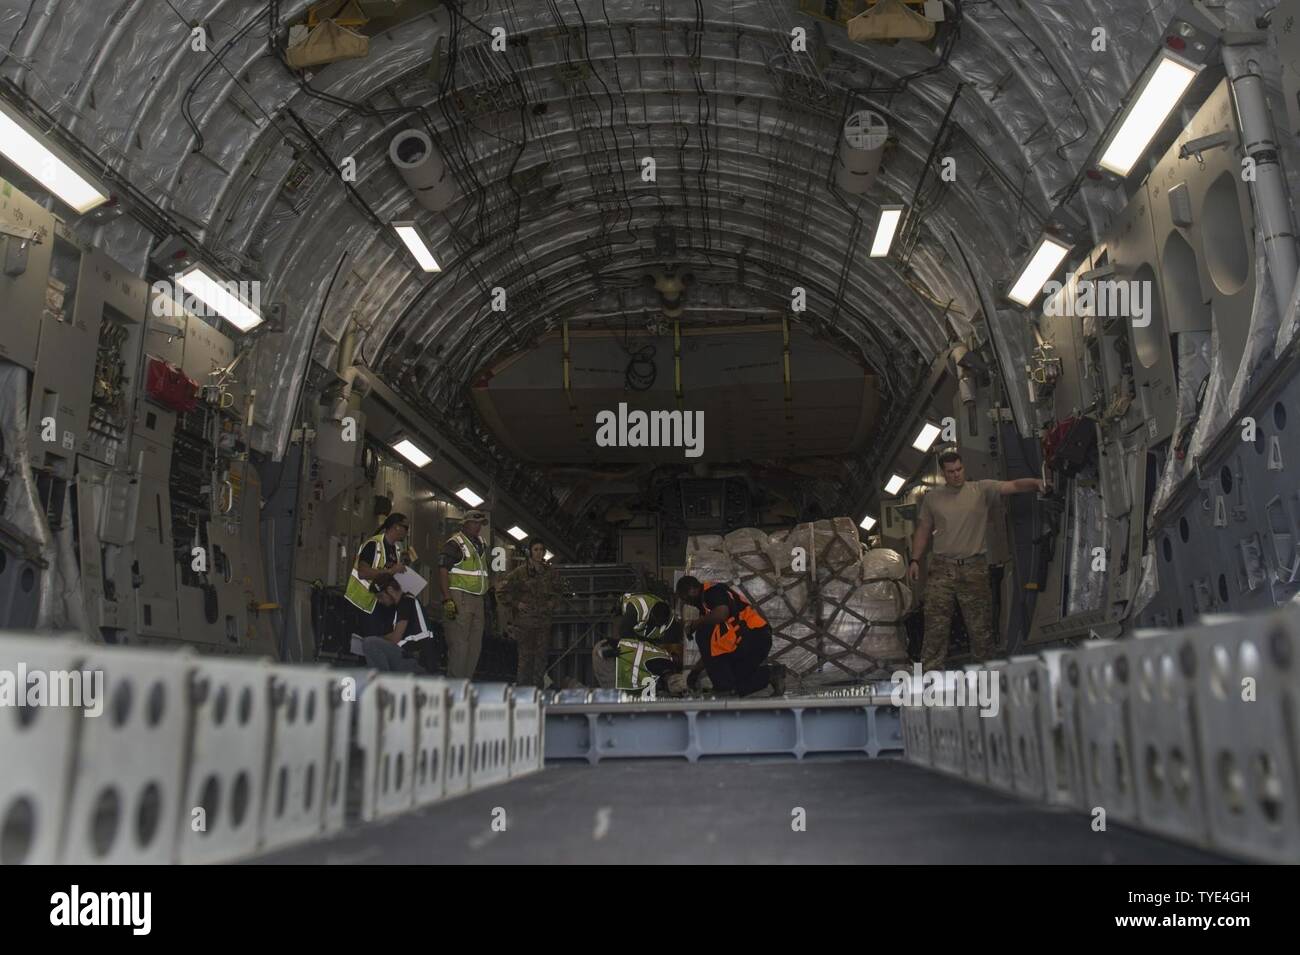 Member of the 455th Expeditionary Logistics Readiness Squadron unload pallets out of an 816th Expeditionary Airlift Squadron C-17 Globemaster III in support of Operation Freedom’s Sentinel Nov. 3, 2016. The operation focuses on training, advising, and assisting the Afghan Security Institutions and Afghan National Defense and Security Forces in order to build their capabilities and long-term sustainability. Stock Photo